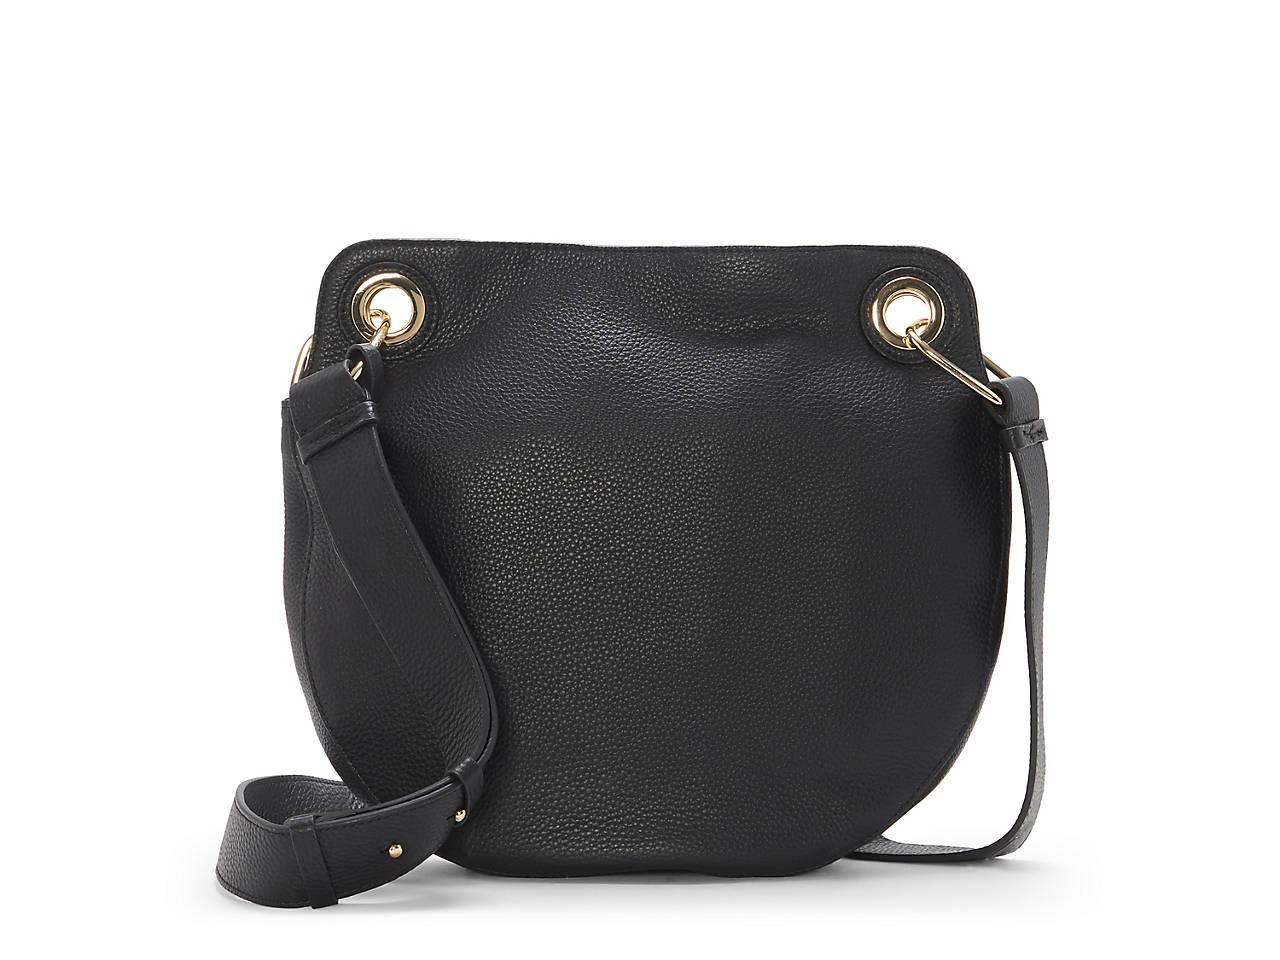 Vince Camuto Faria Leather Crossbody Bag in Black | Lyst